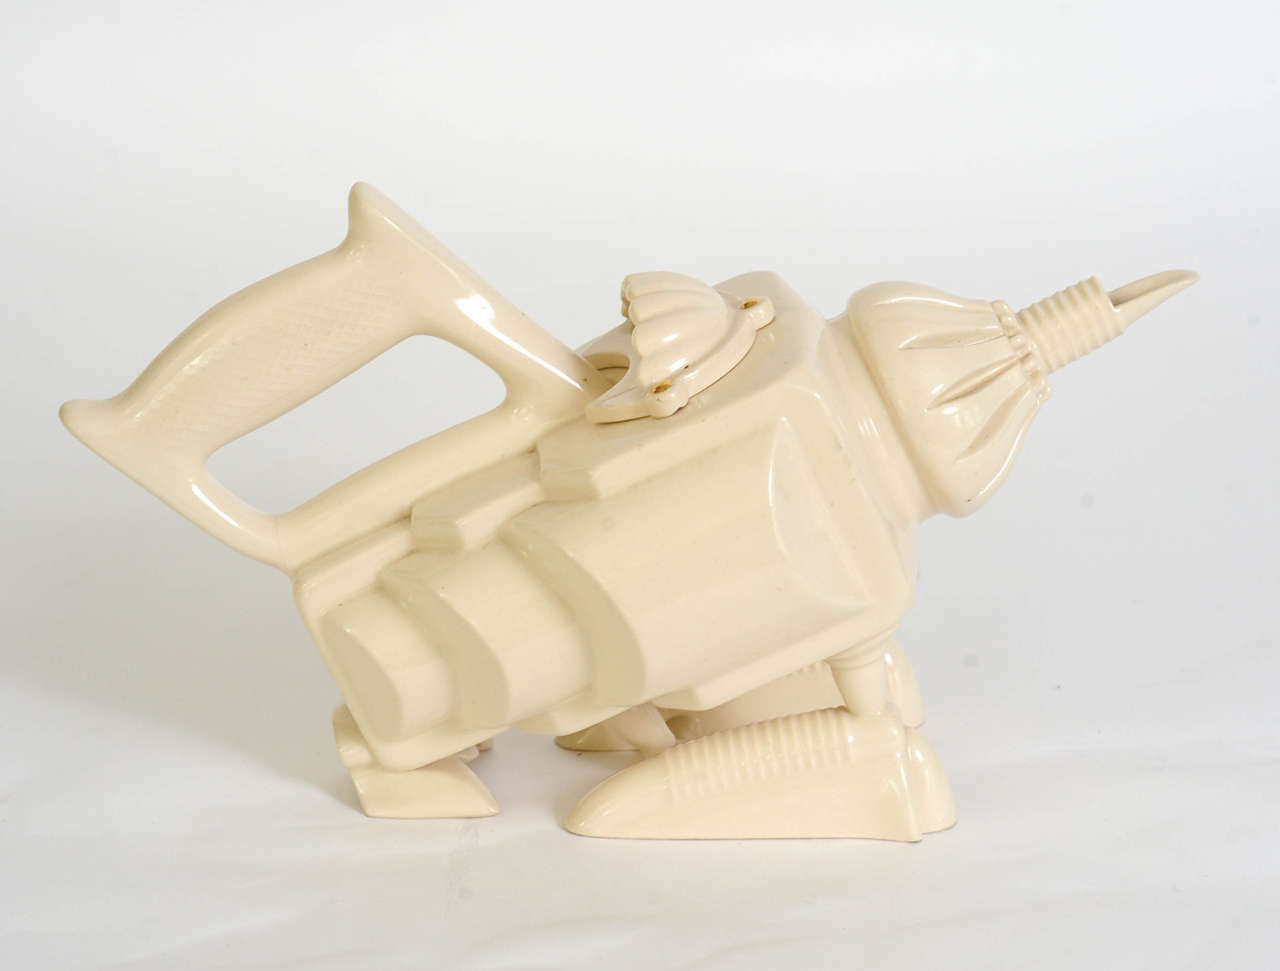 This cheerful cream colored teapot is like having a wingless water plane on your coffee table.
Its basis consists of two 